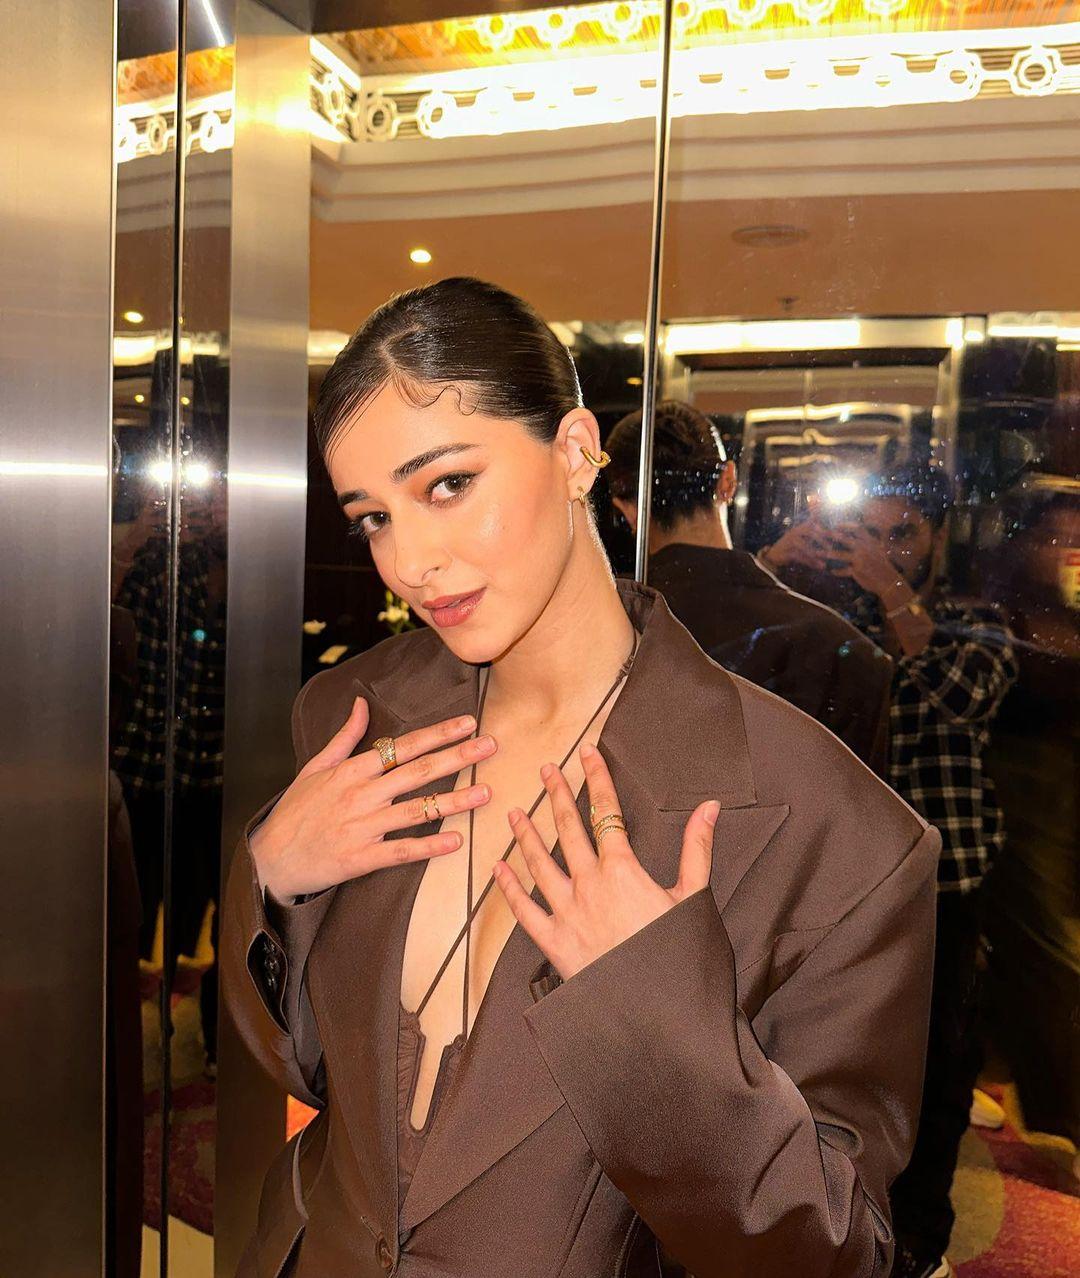 Ananya Panday spiced up her outfit by wearing a halter strap bodysuit with a plunging neckline. She paired it with an oversized blazer!